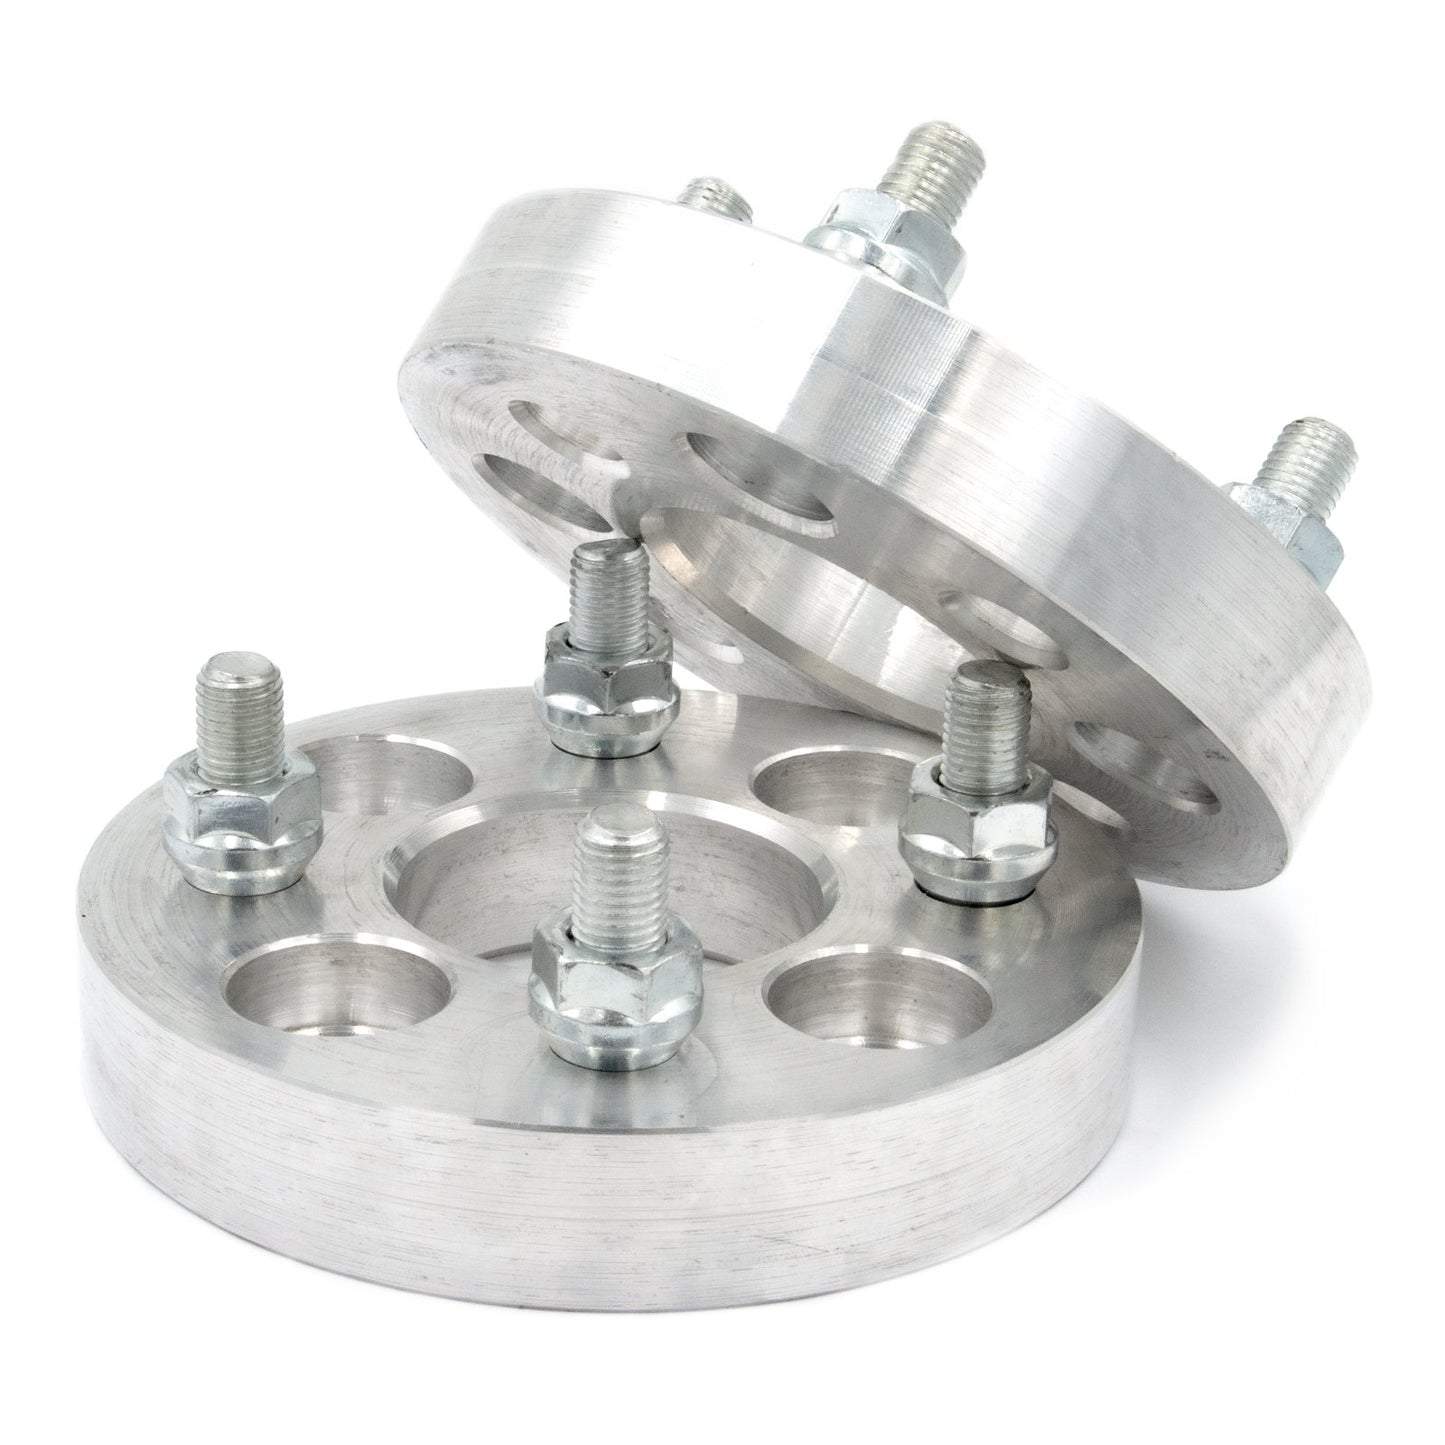 4x100 to 4x156 Wheel Spacer/Adapter - Thickness: 3/4"- 4"